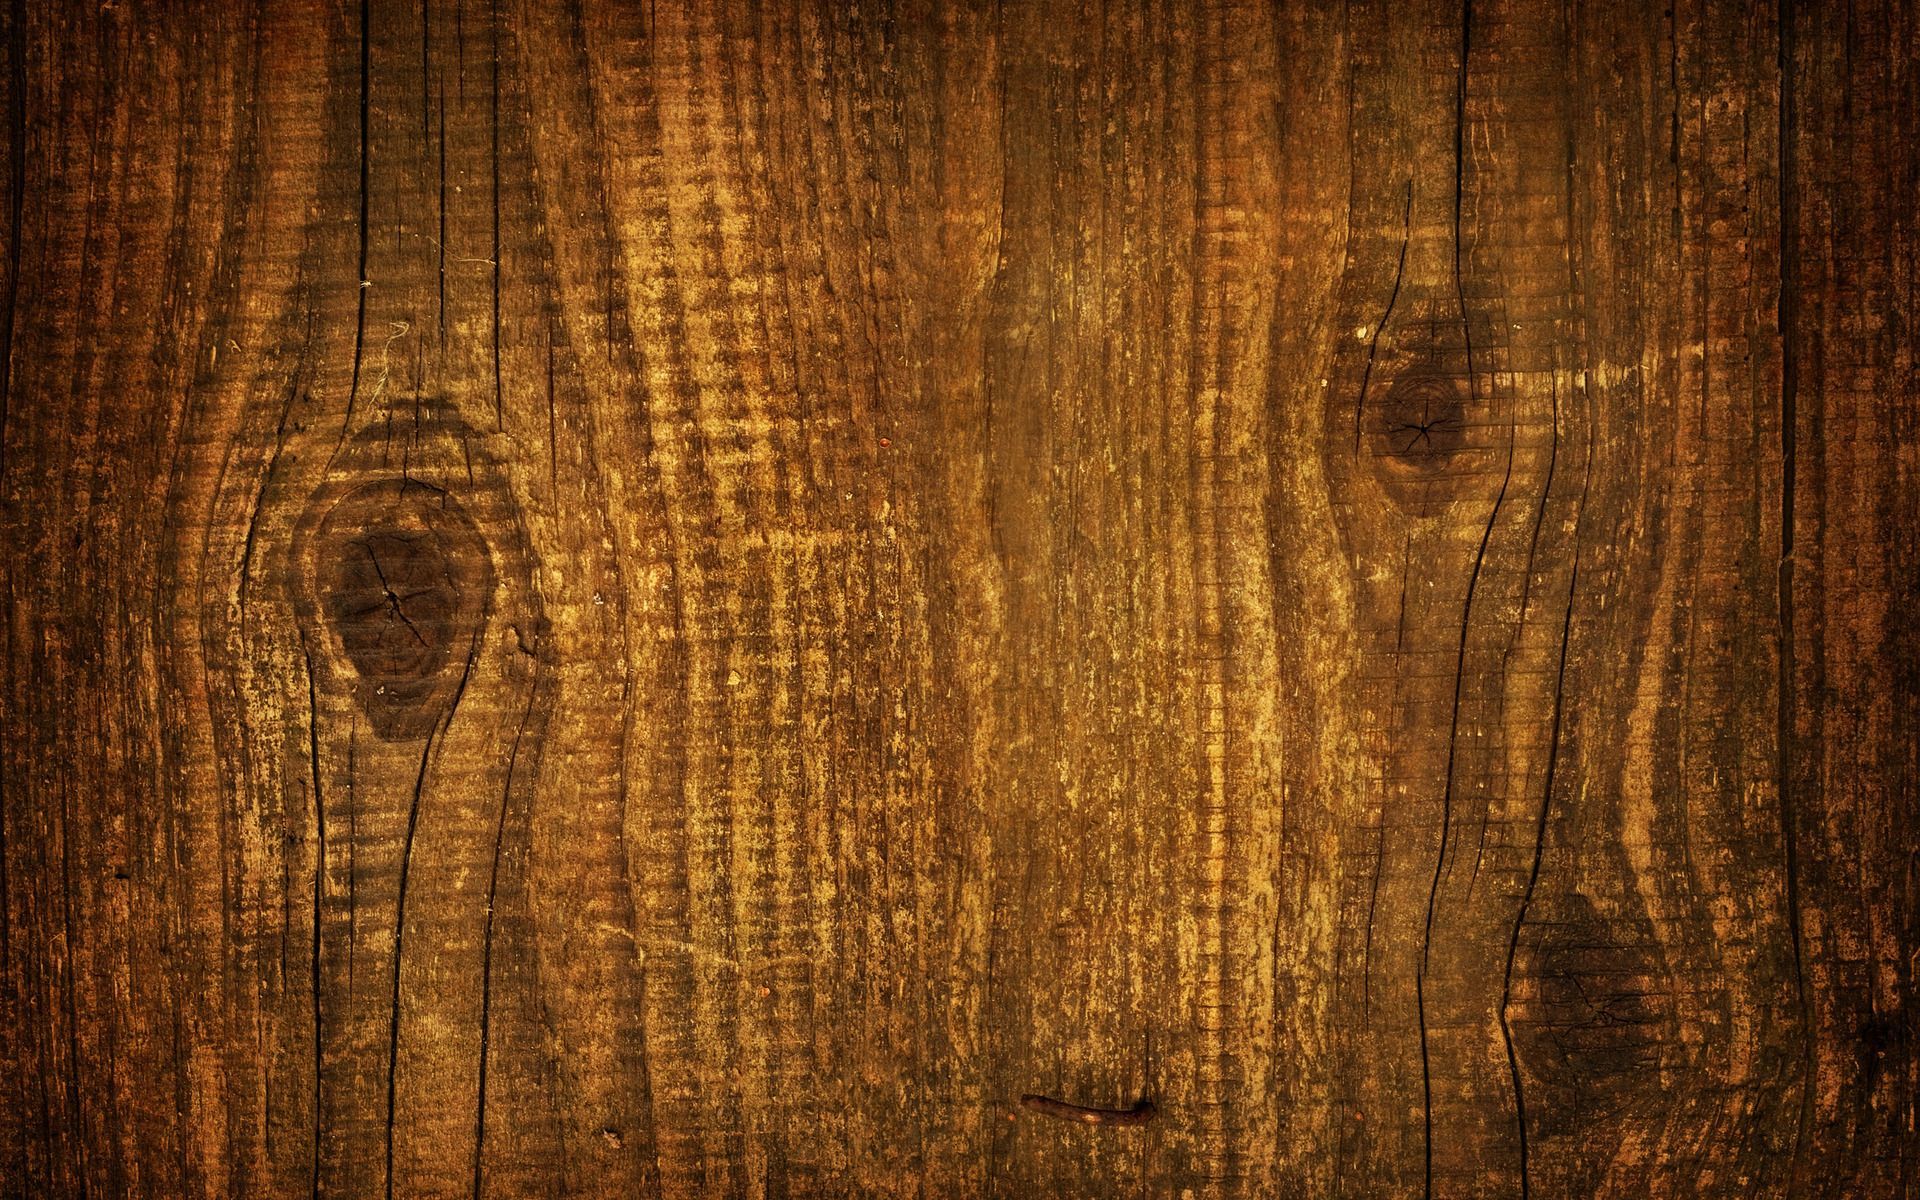 40+ Stunning and Cool HD Wood Backgrounds | TechUsg